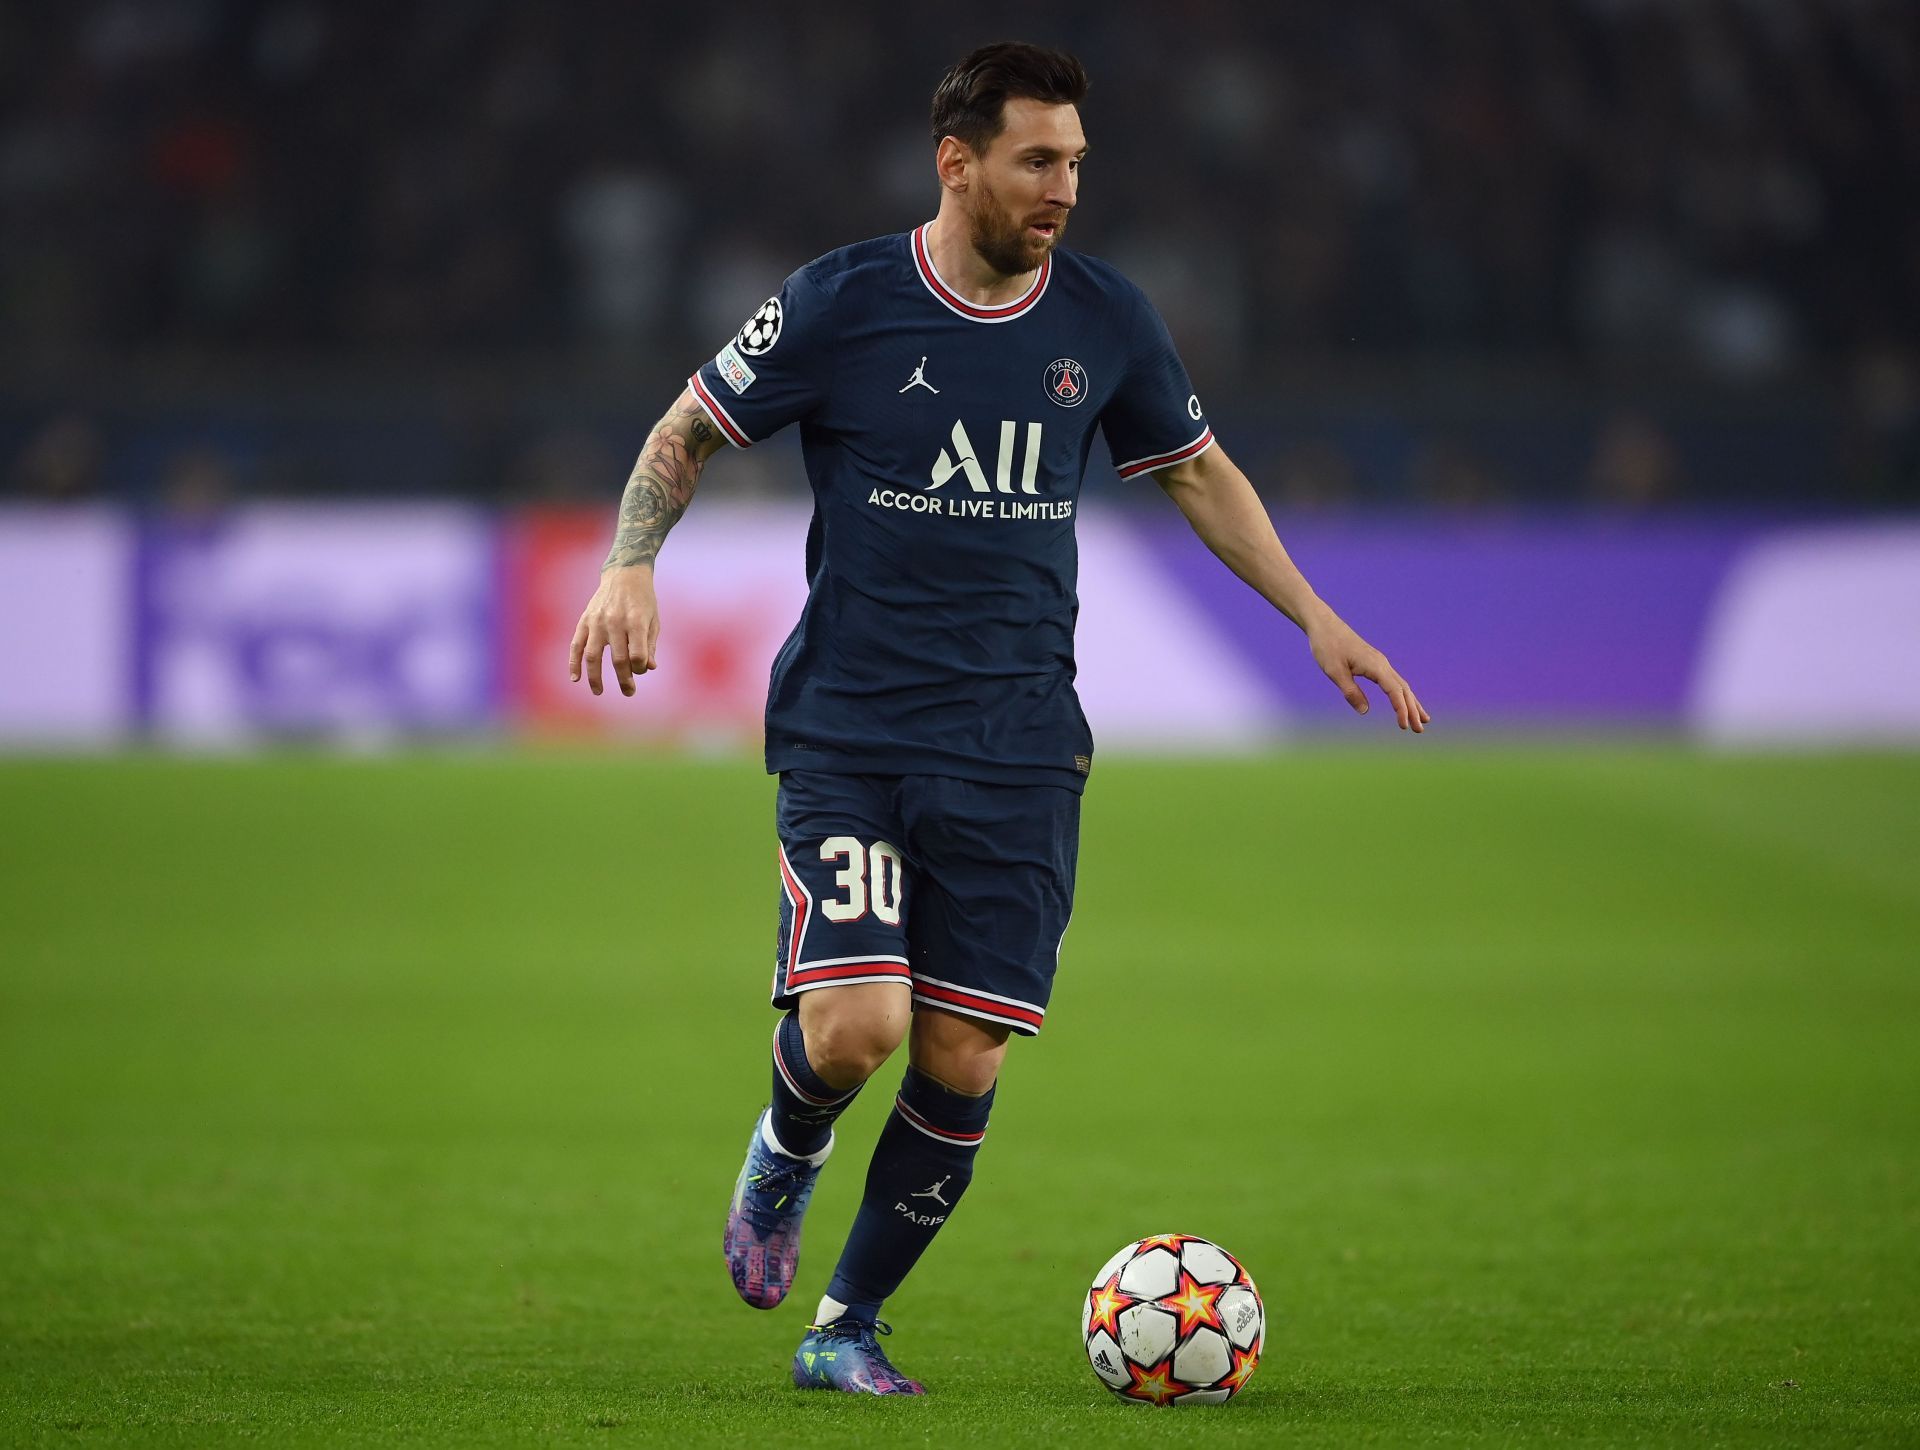 Lionel Messi is yet to score his first goal in Ligue 1